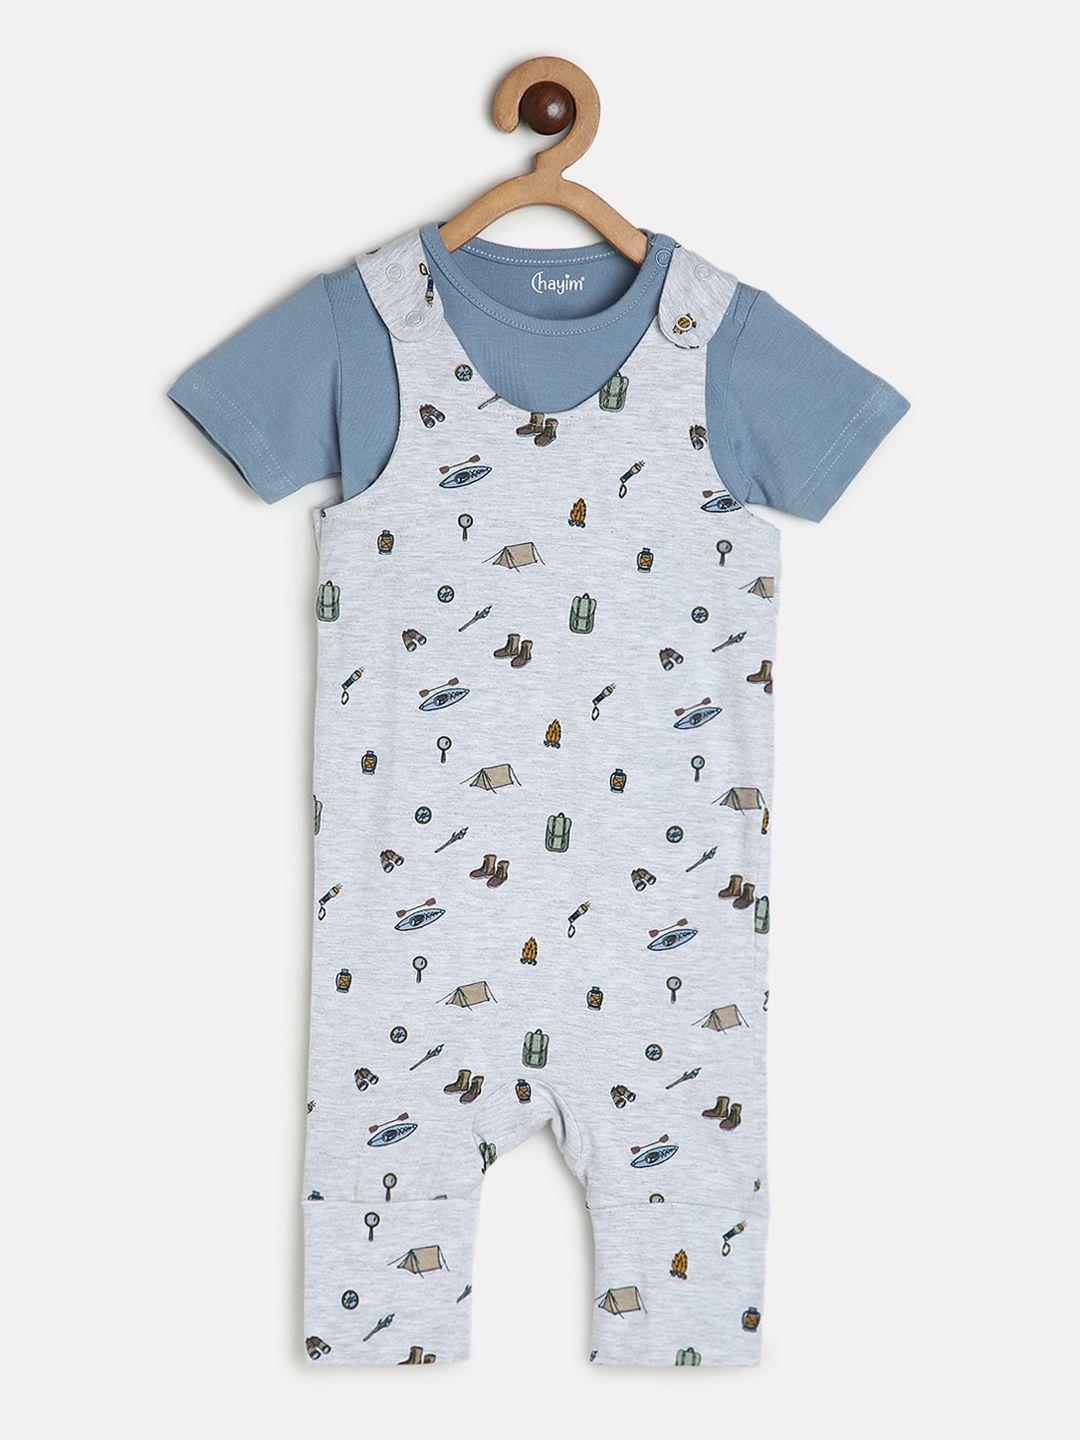 chayim-infants-graphic-printed-cotton-dungaree-with-t-shirt